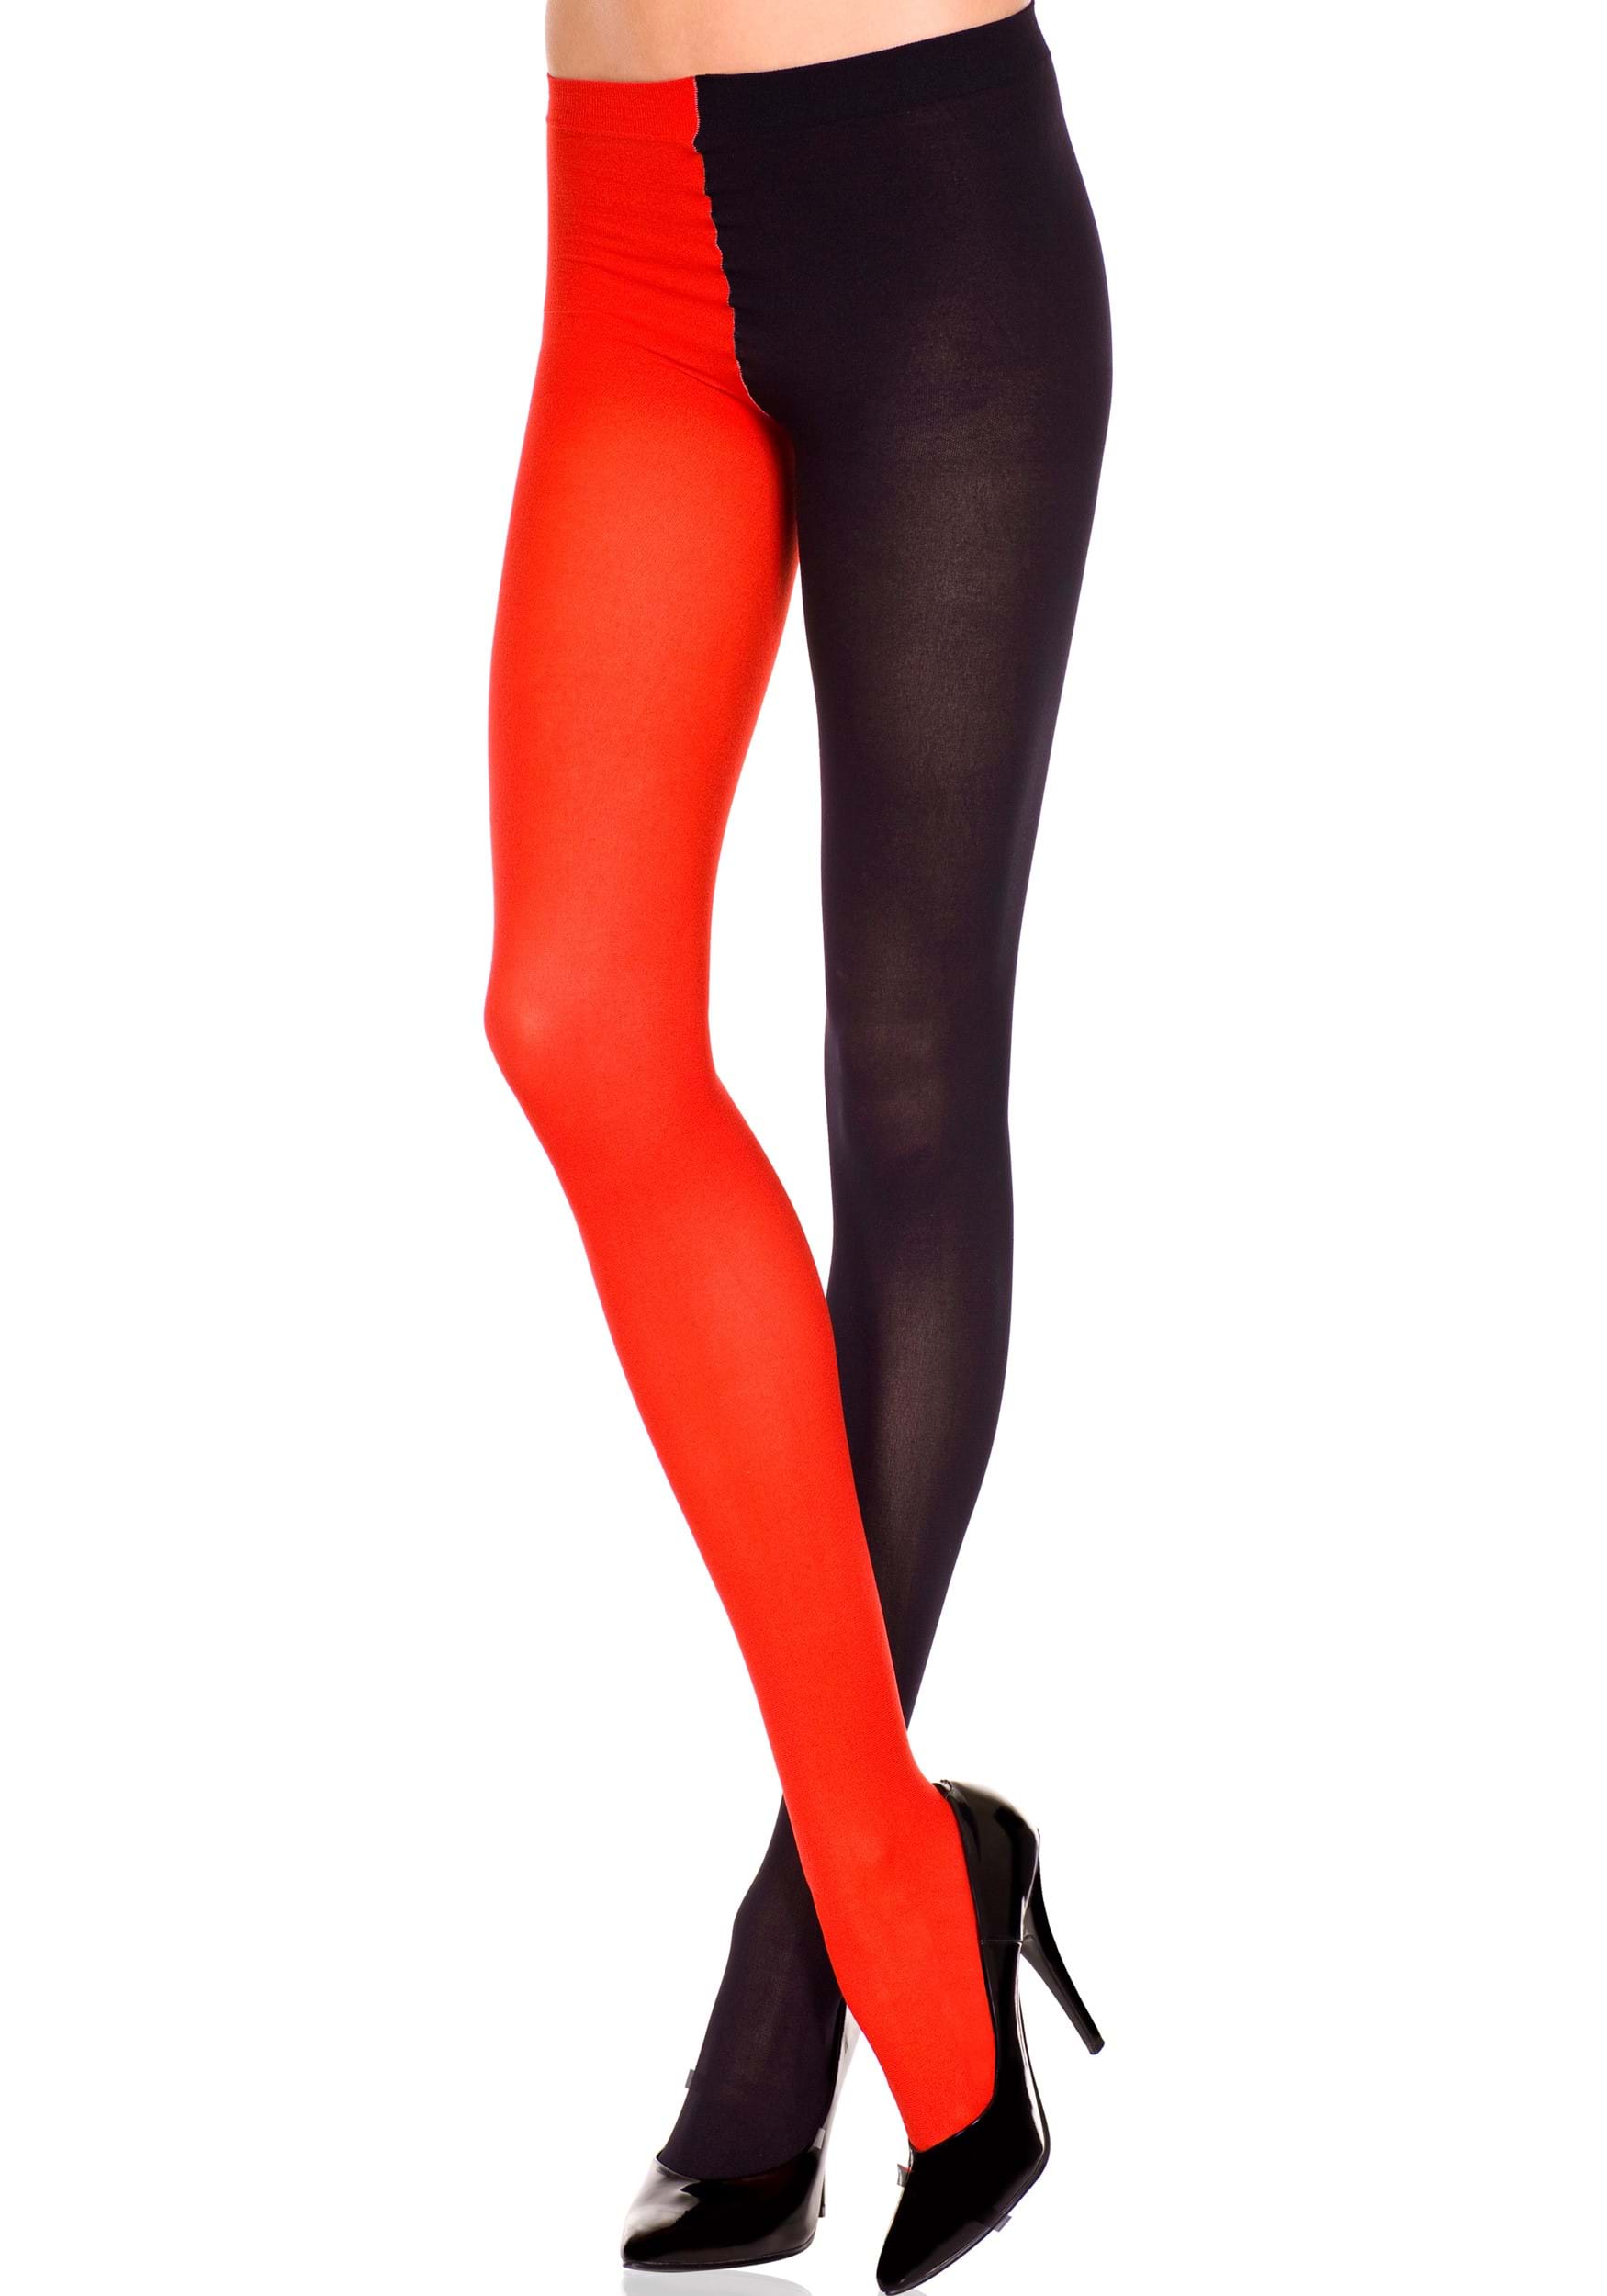 https://images.halloweencostumes.ca/products/32389/1-1/plus-size-opaque-jester-tights.jpg